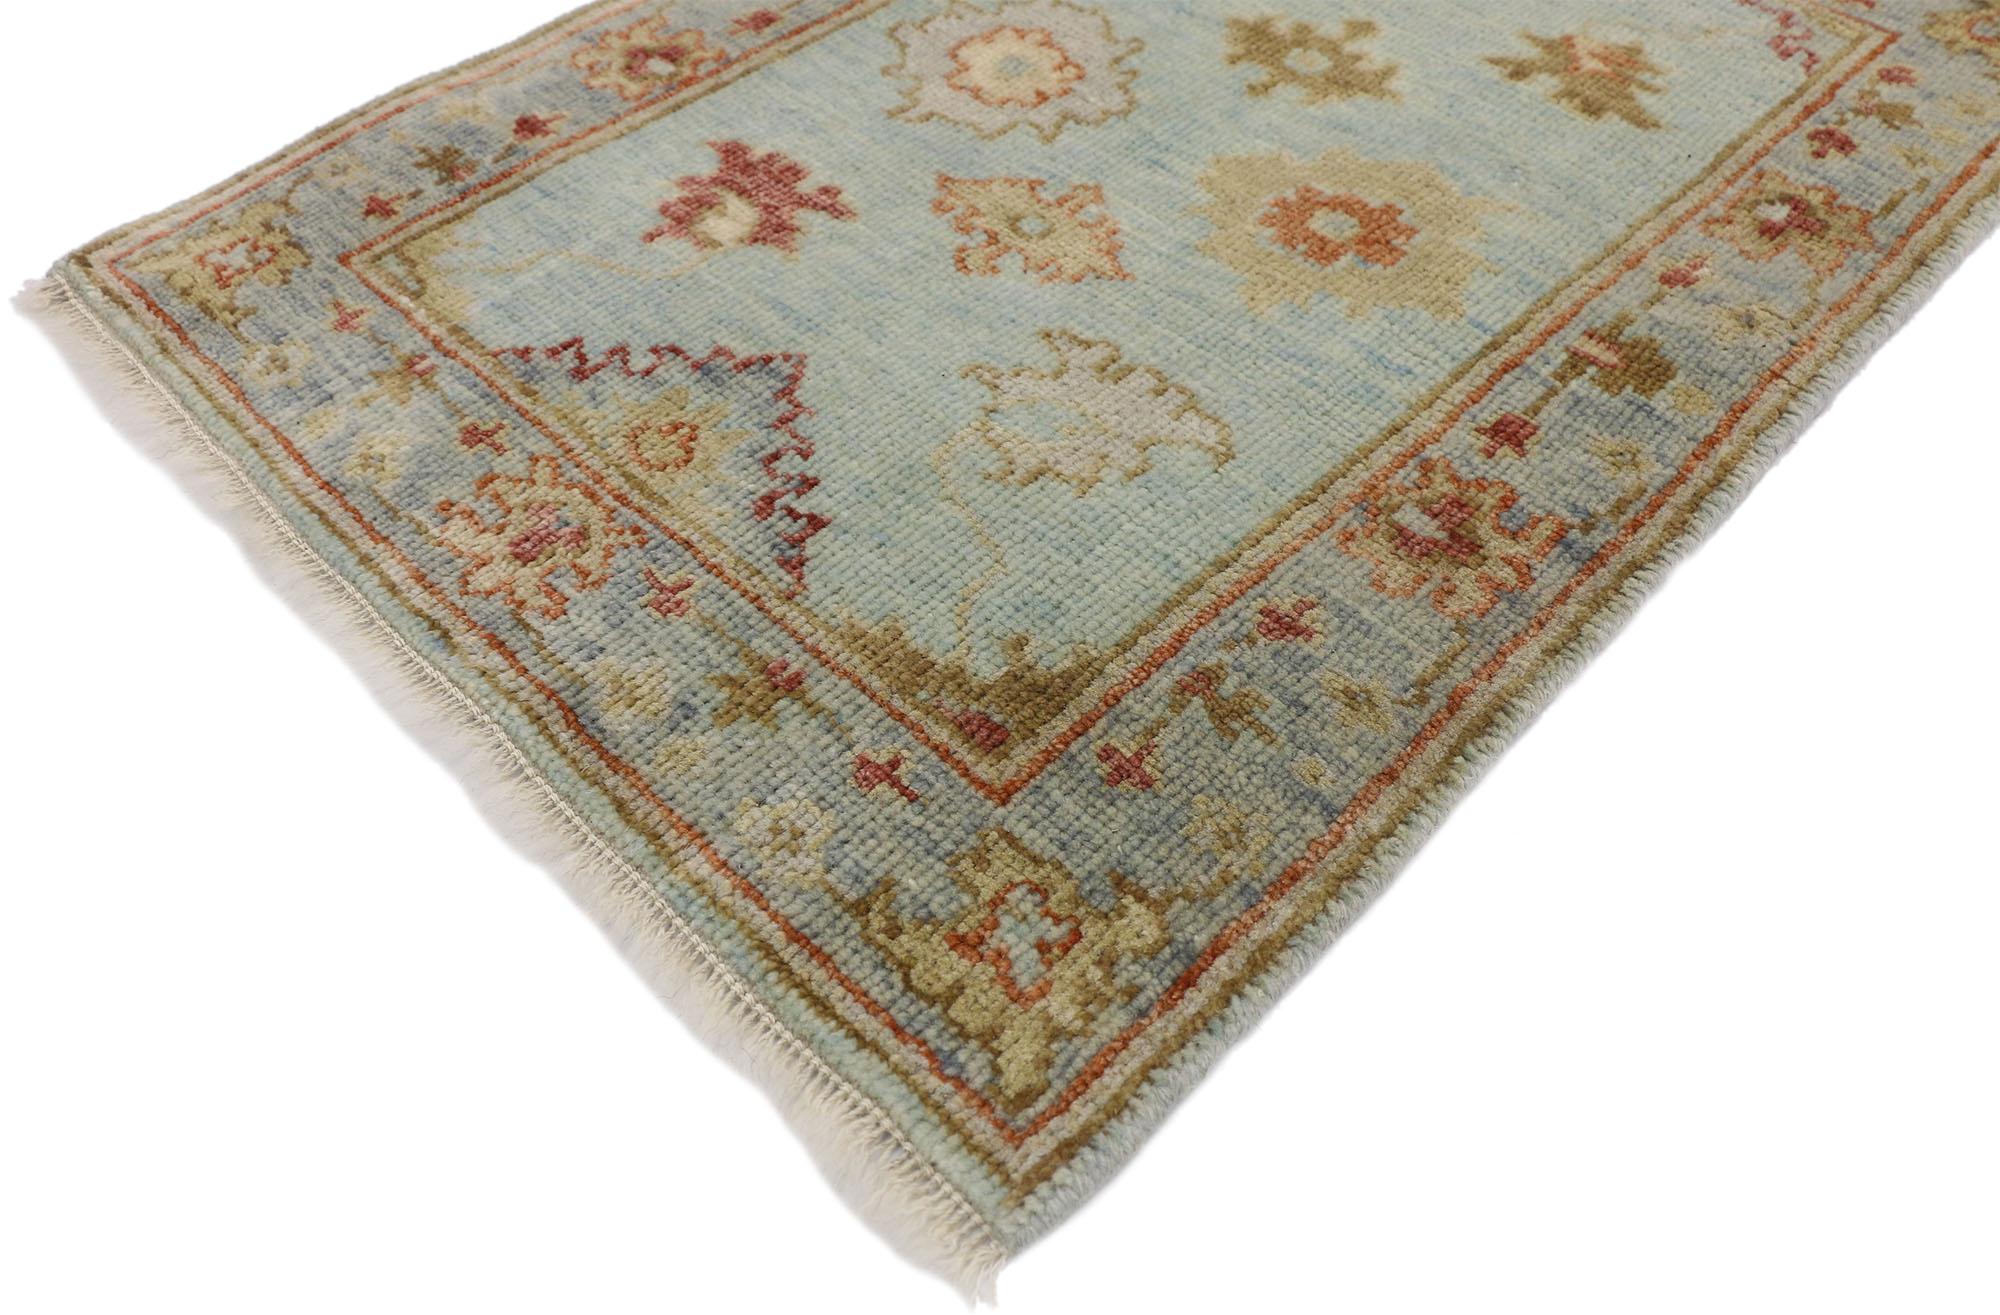 30496, new contemporary Oushak Indian rug with Eclectic Coastal Boho style. This hand knotted wool contemporary Oushak accent rug features an all-over colorful geometric pattern composed of Harshang-style motifs, blooming palmettes, and organic